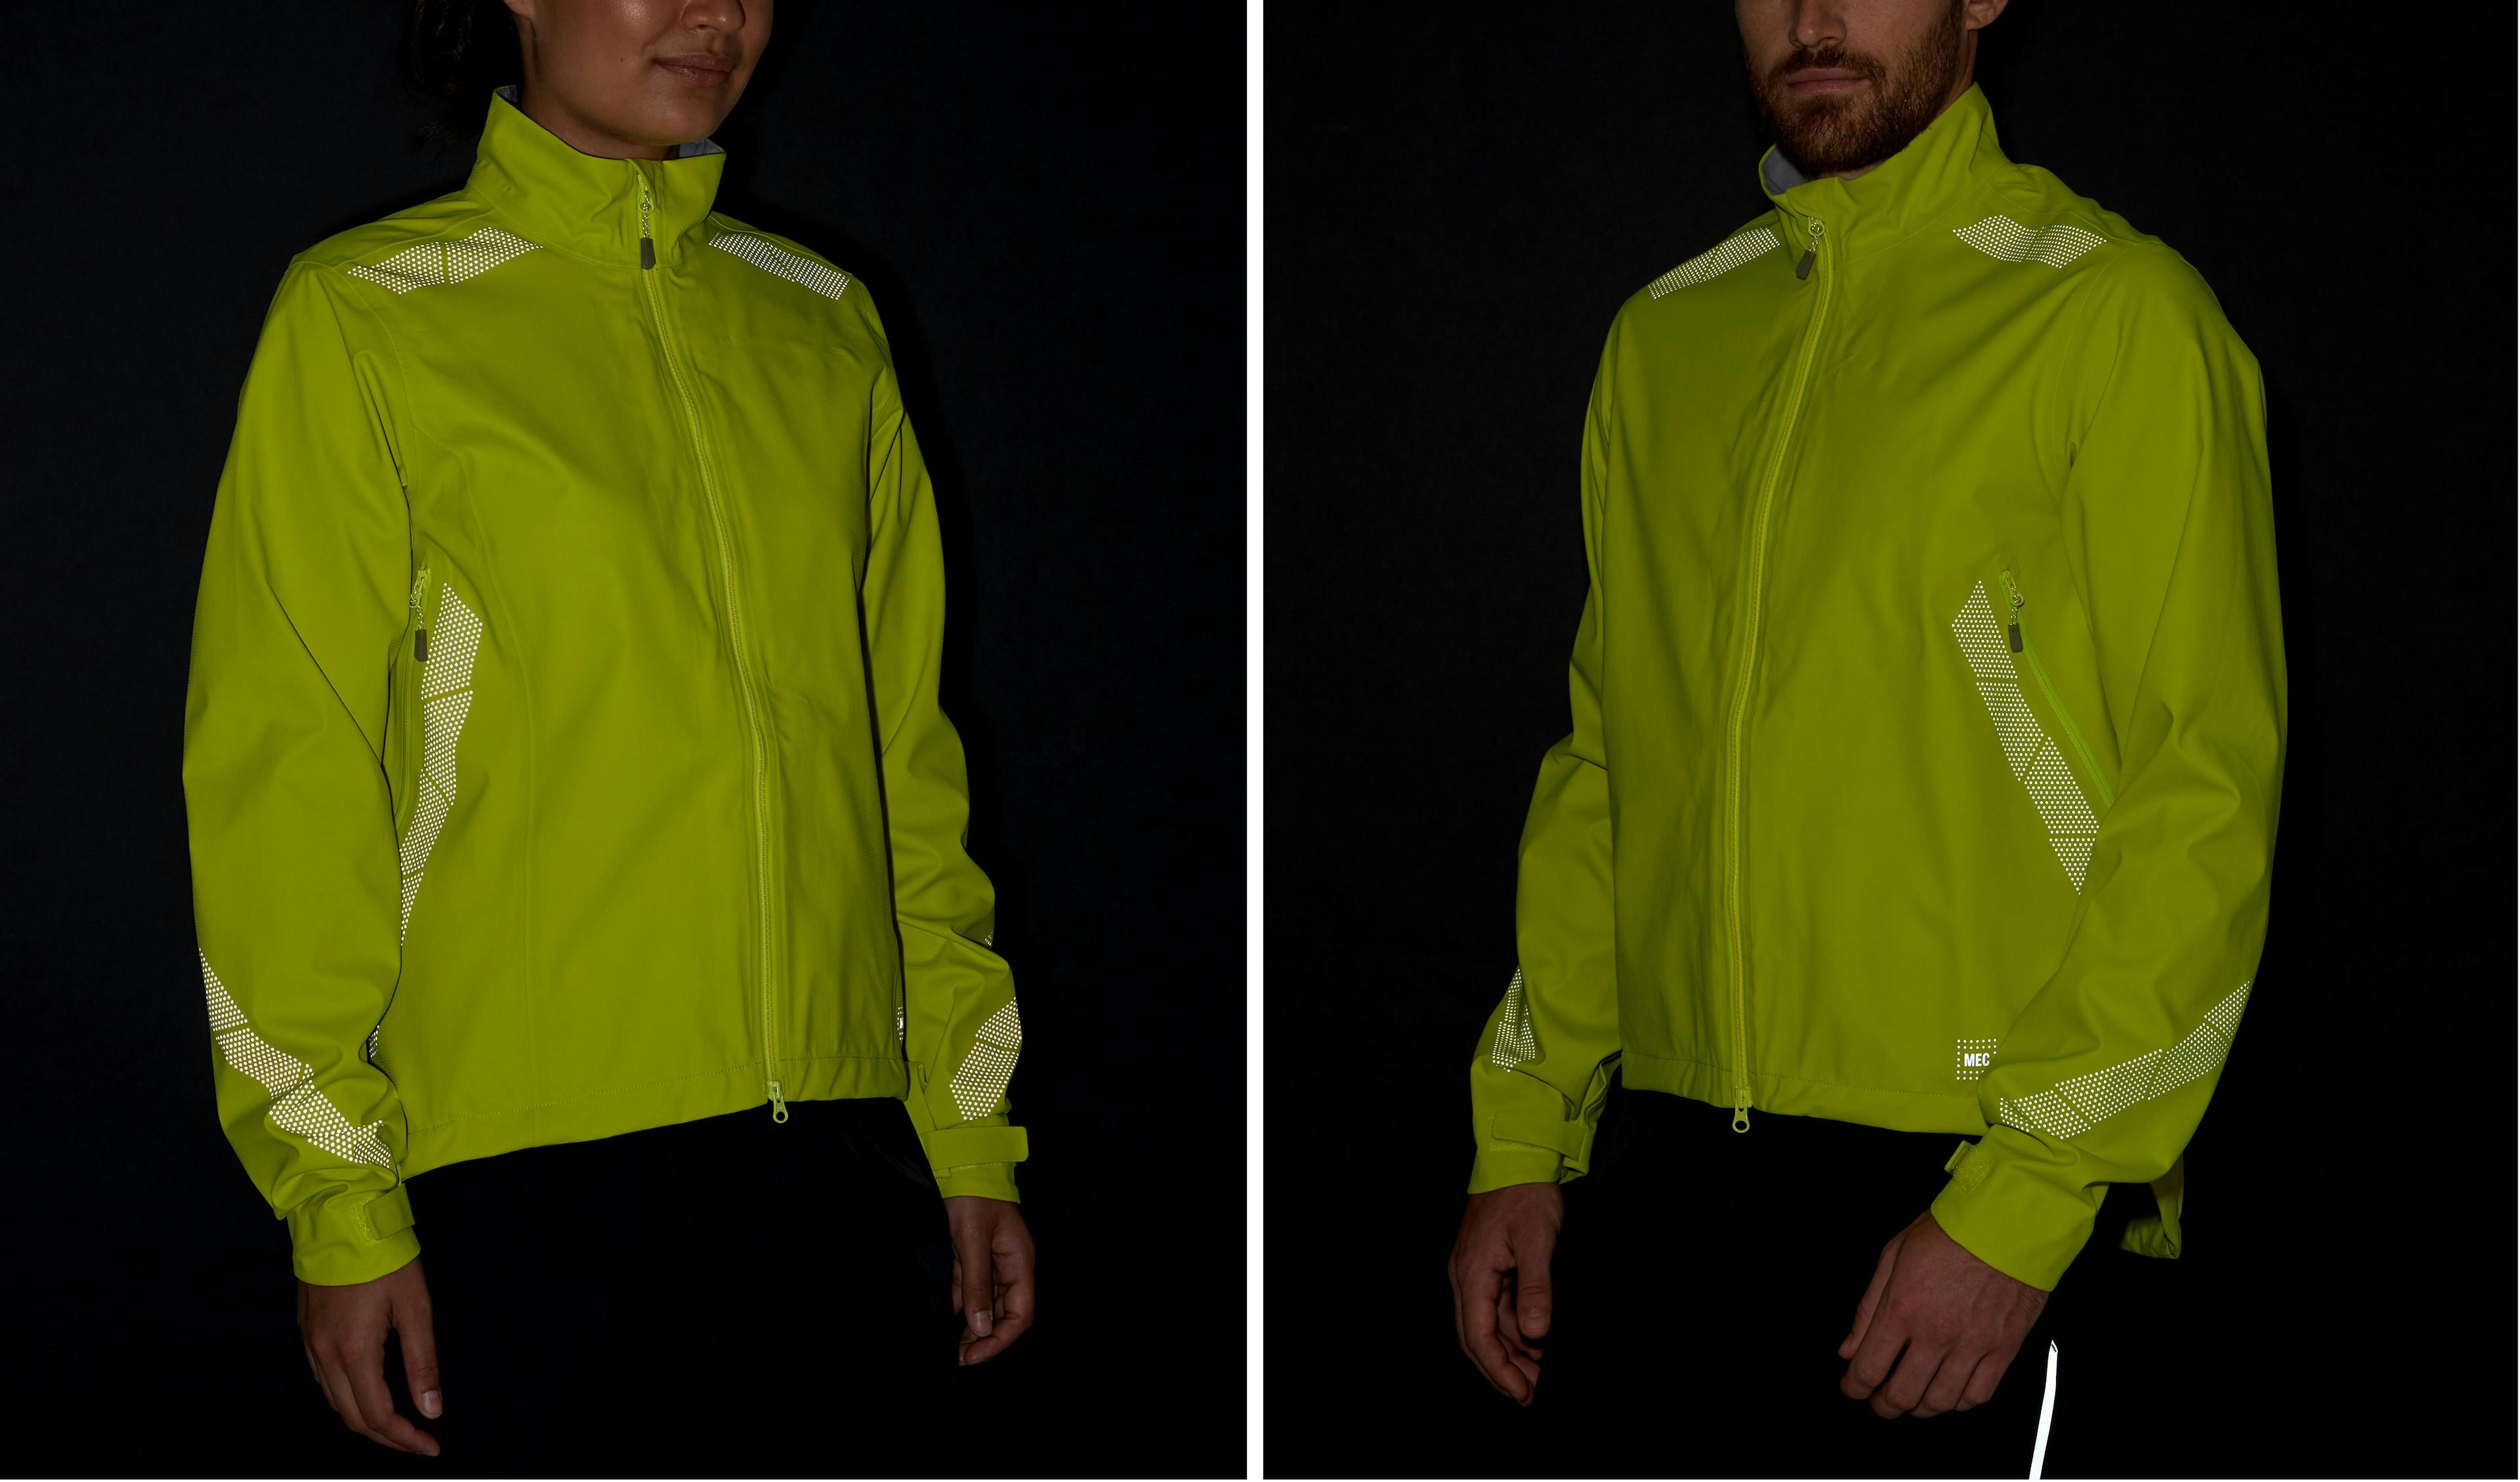 Two bike jackets with reflective parts shining in the dark